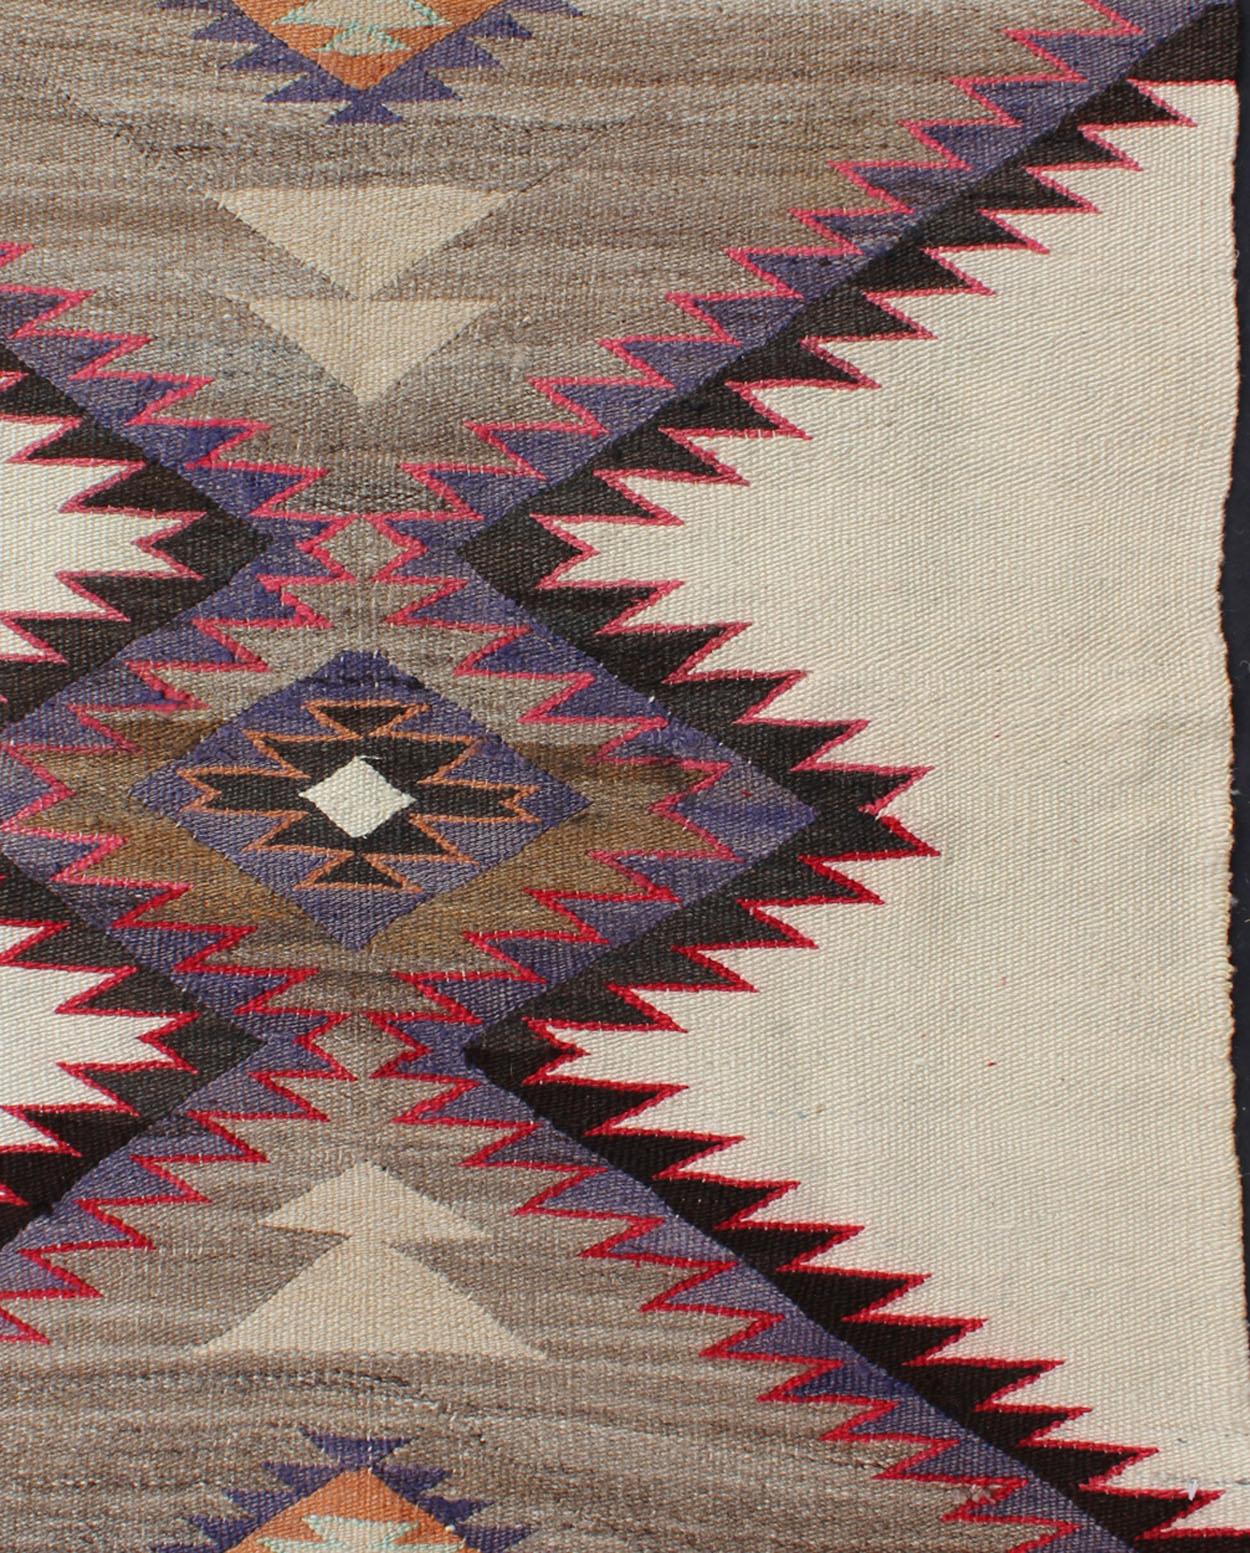 This intriguing antique Navajo rug, (circa 1930) was woven in the United States during the first half of the 20th century. The exciting and unique composition boasts a captivating geometric composition with an all-over diamond latch hooked design.